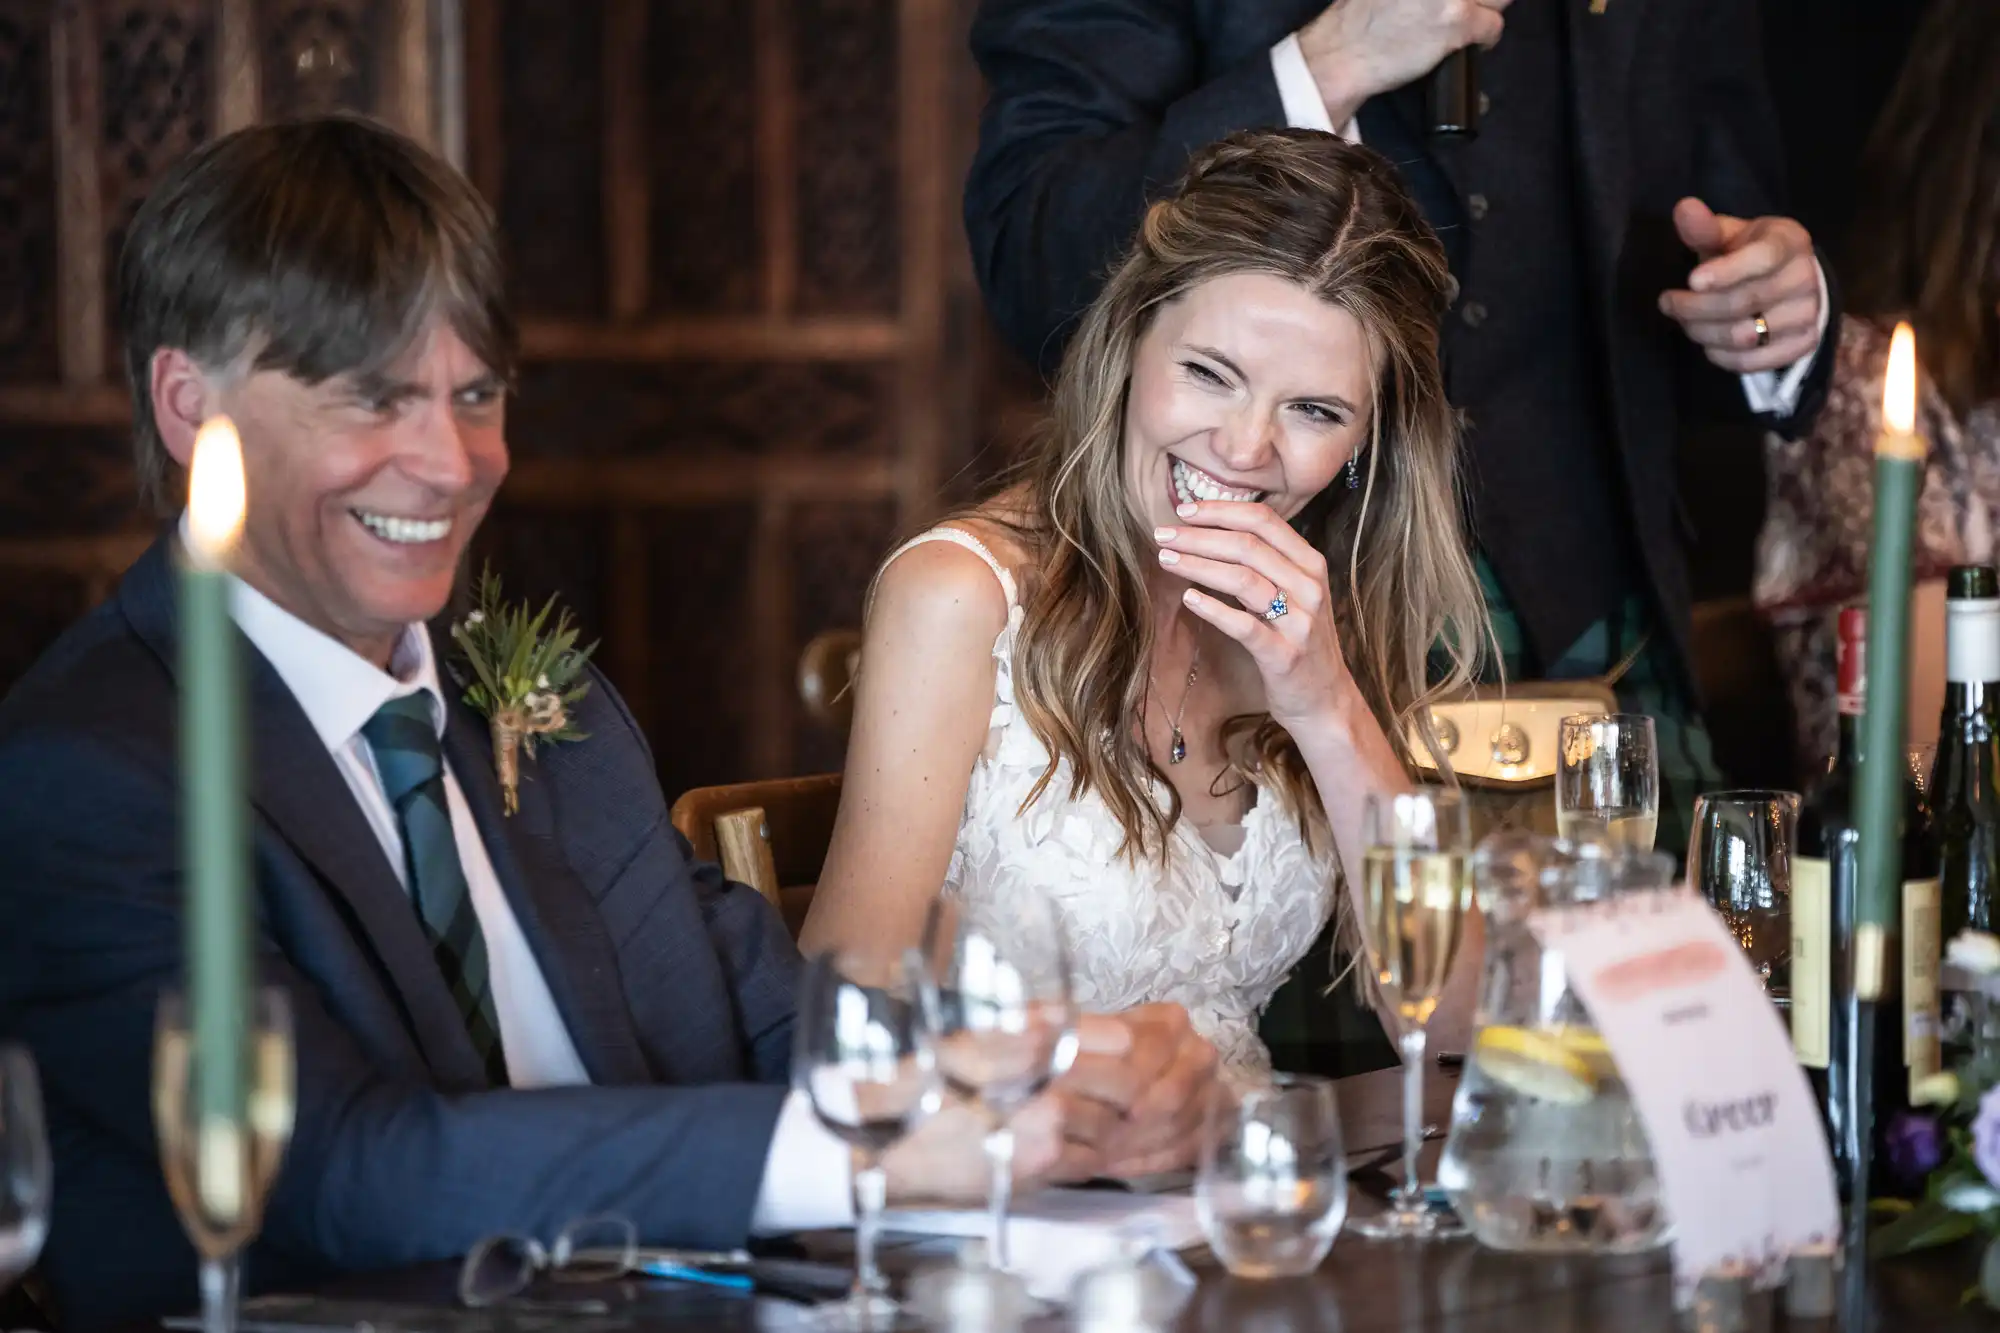 A bride and a man in a suit share a laugh at a table set with glasses, bottles, and candles during a wedding reception.